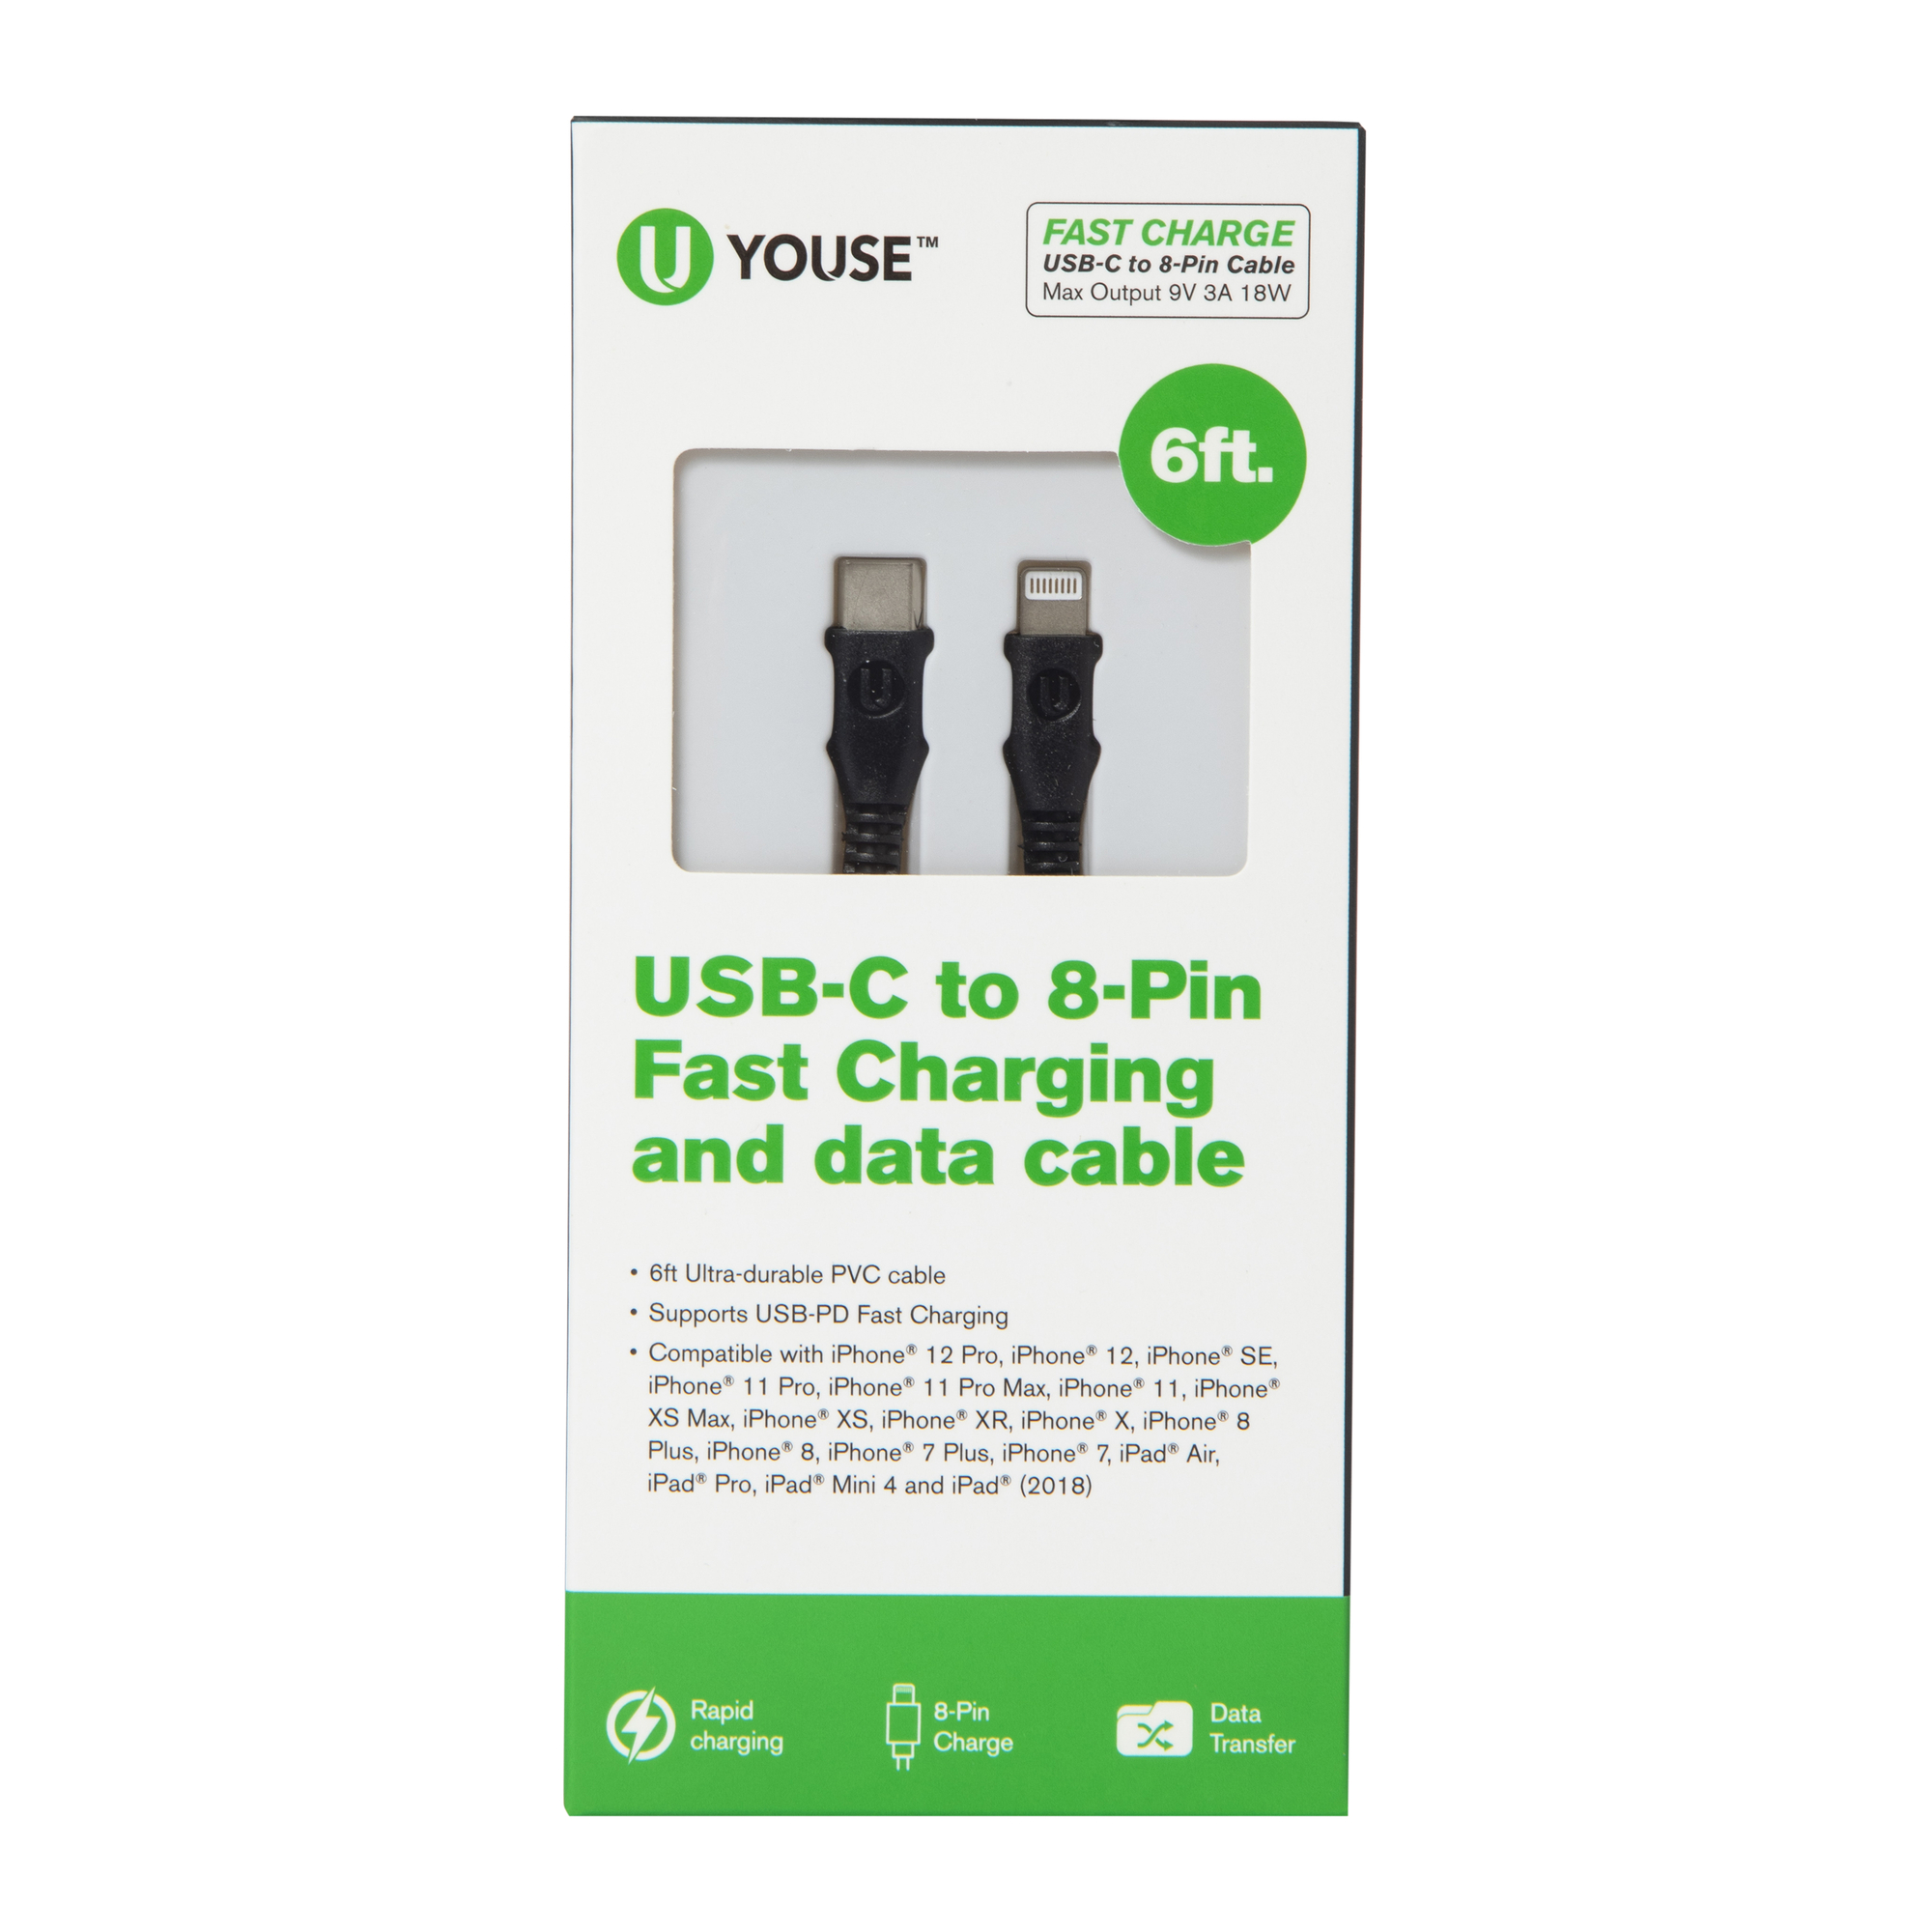 6ft USB Type-C to 8-pin cable